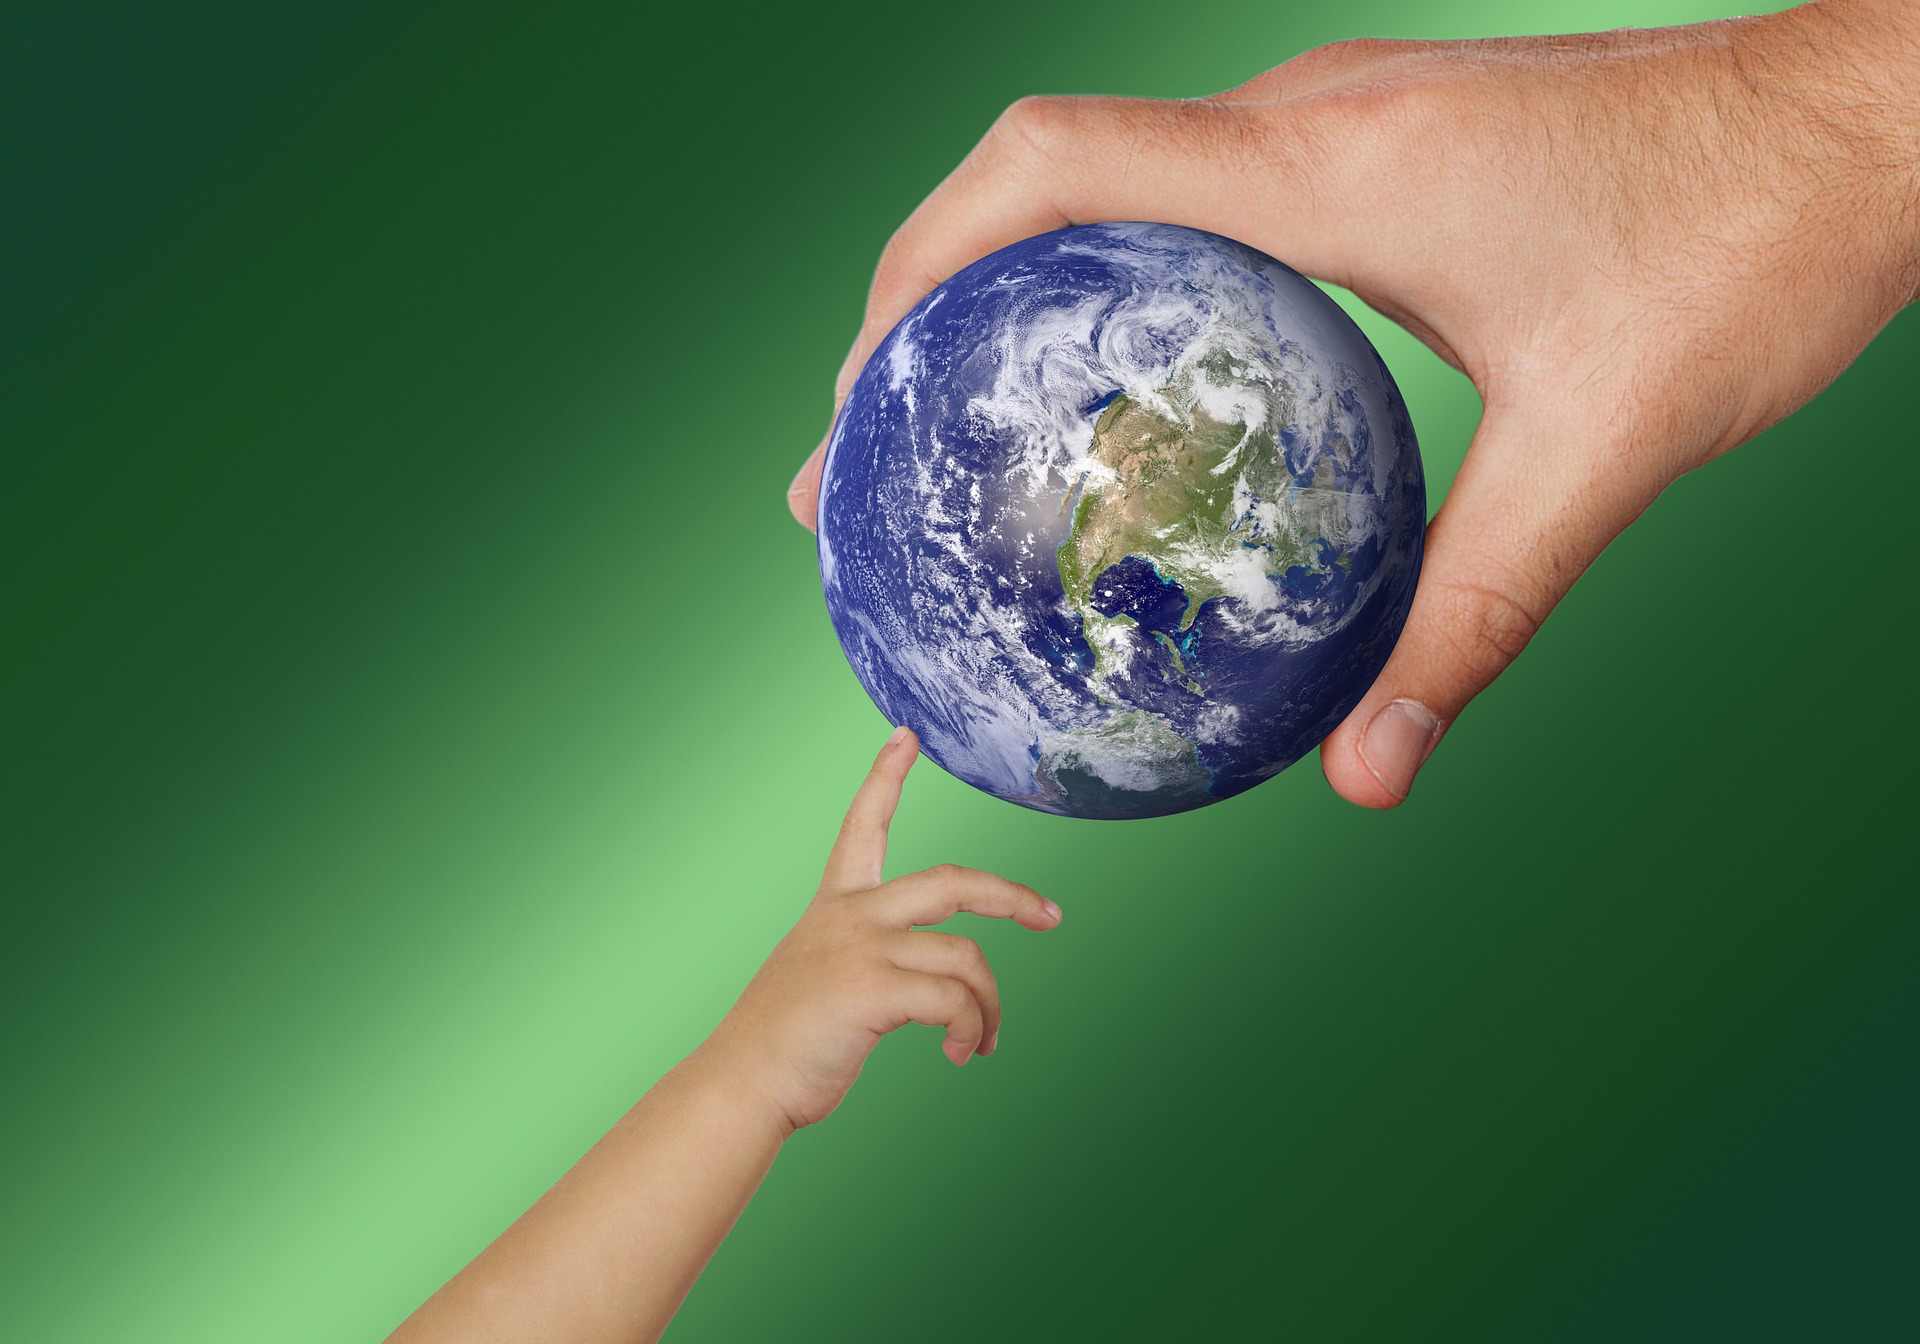 A picture.  A man's hand at top right holds a small planet earth.  Reaching up from bottom left, a child's hand stretches out to touch it